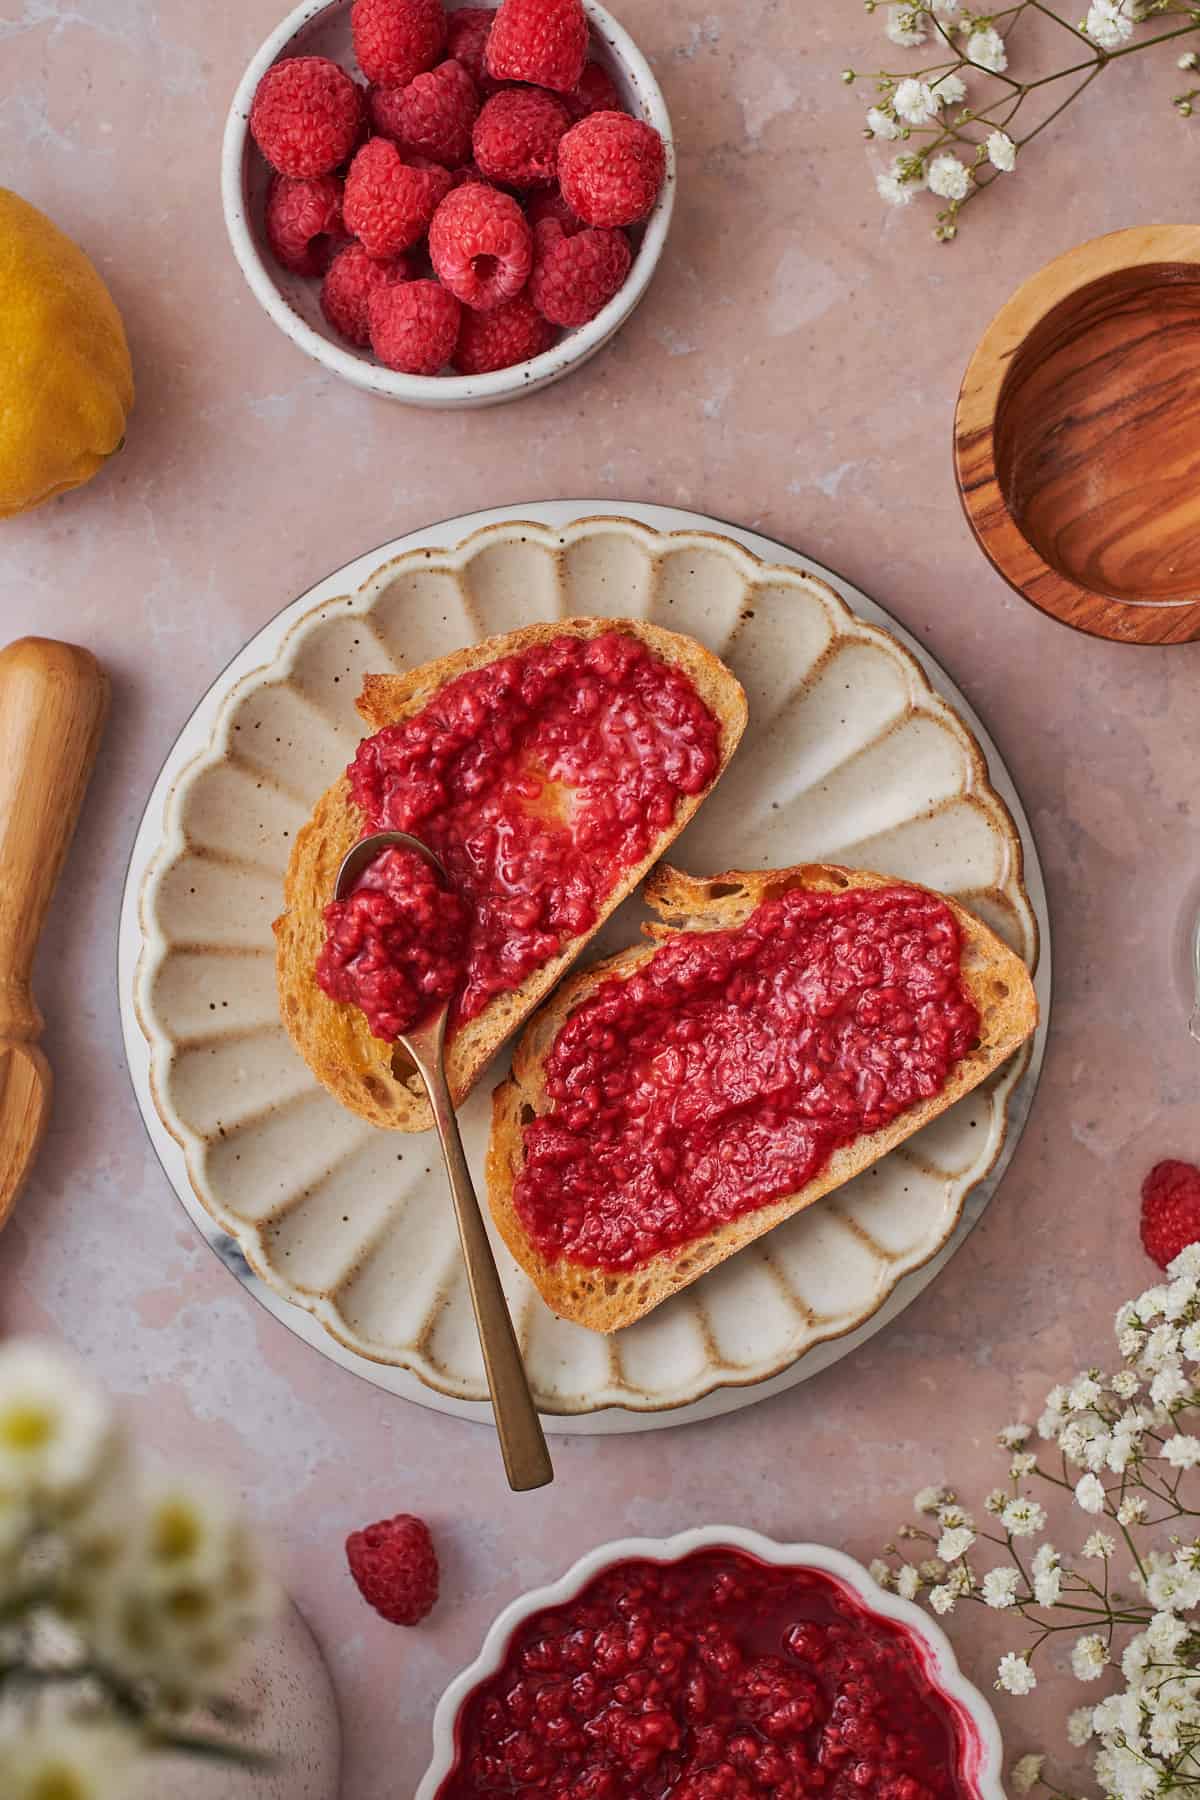 raspberry compote spread onto sourdough bread, with little white flowers surrounding the ruffled plate. 